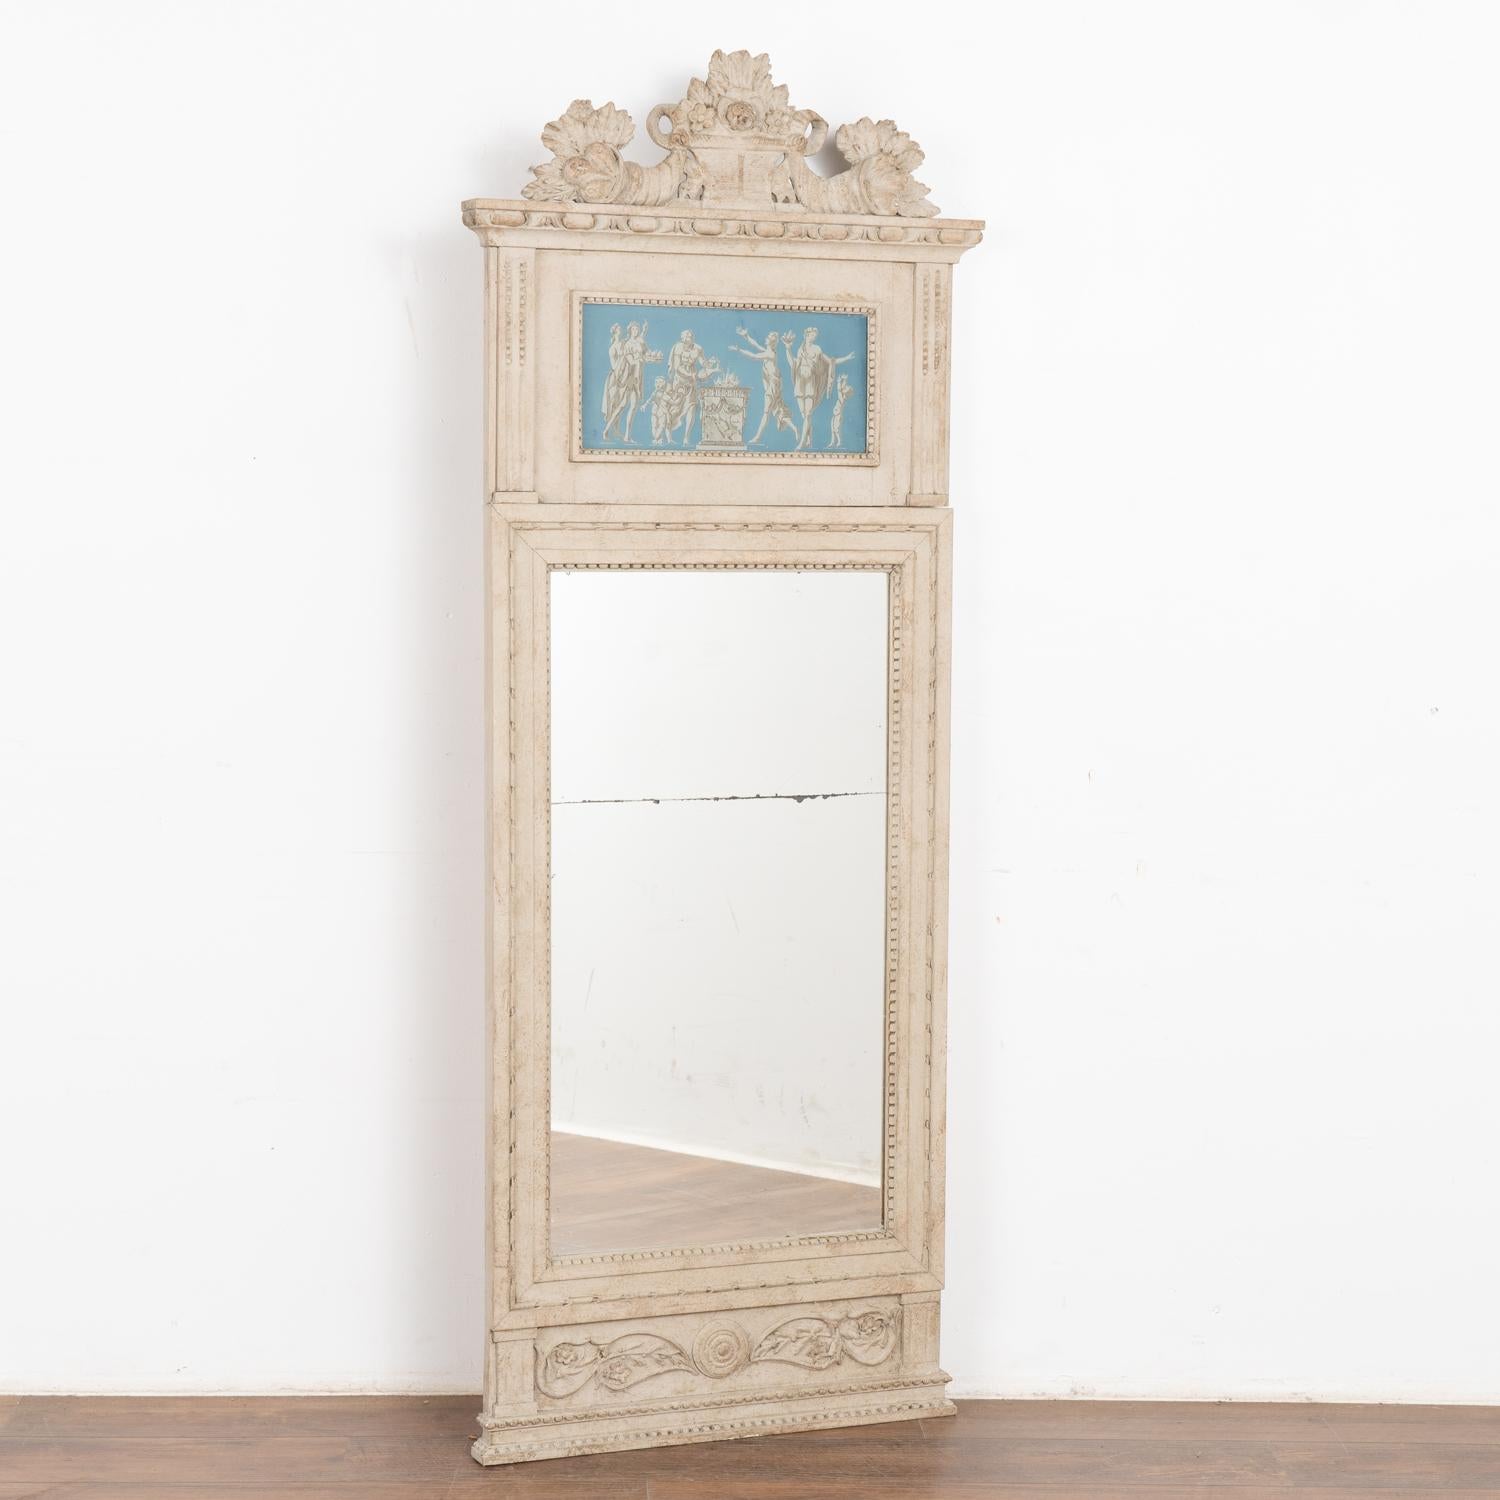 Tall decorative trumeau mirror with carved accents. Upper section portrays Greek figures against a blue painted background.
The antique white painted finish is lightly distressed creating a refined grace fitting the age of the mirror.
Mirror glass